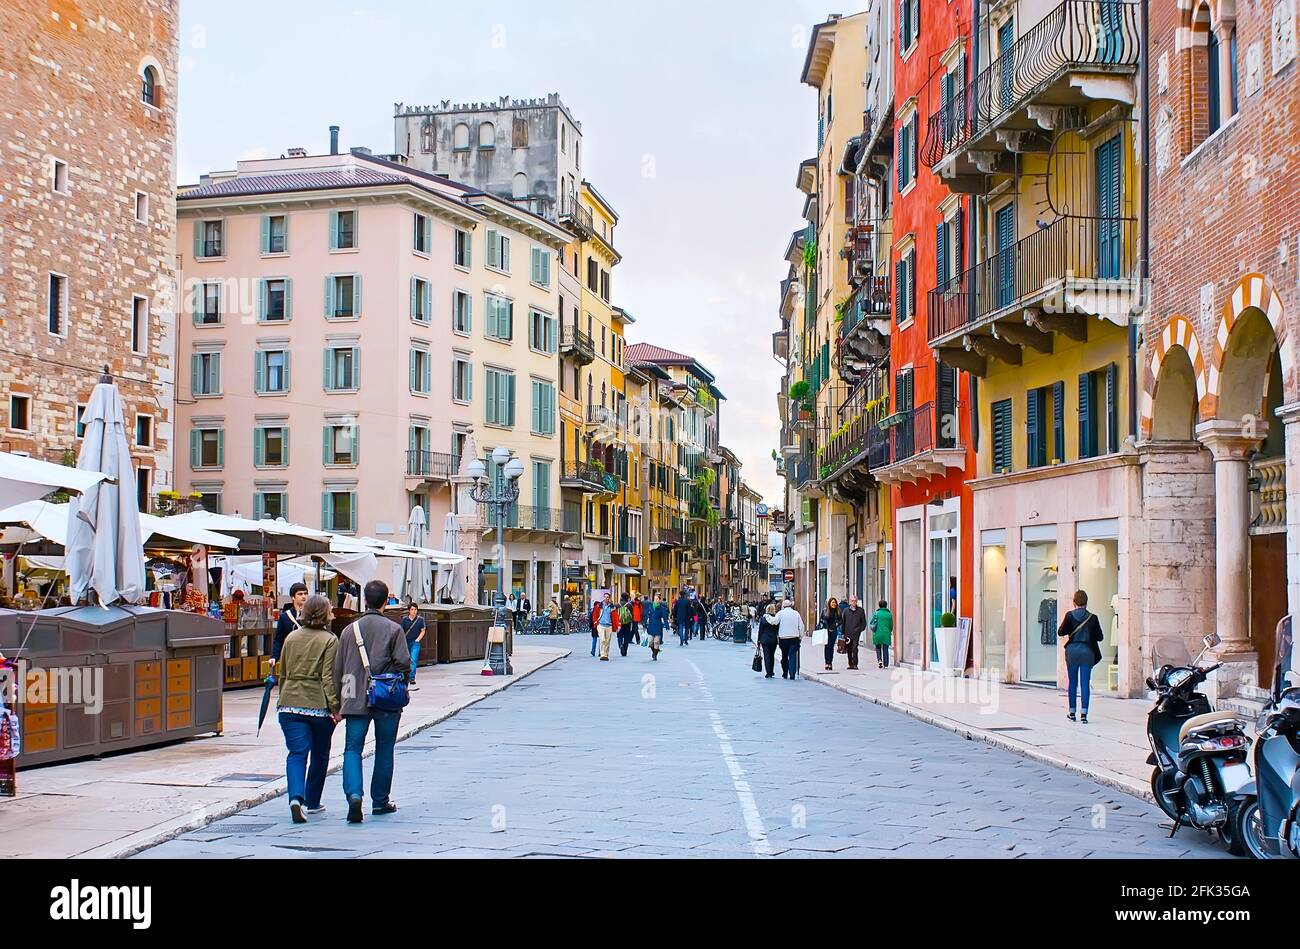 VERONA, ITALY - APRIL 23, 2012: The view of the colorful houses of Via Cappello street from the Piazza Erbe Square, on April 23 in Verona Stock Photo